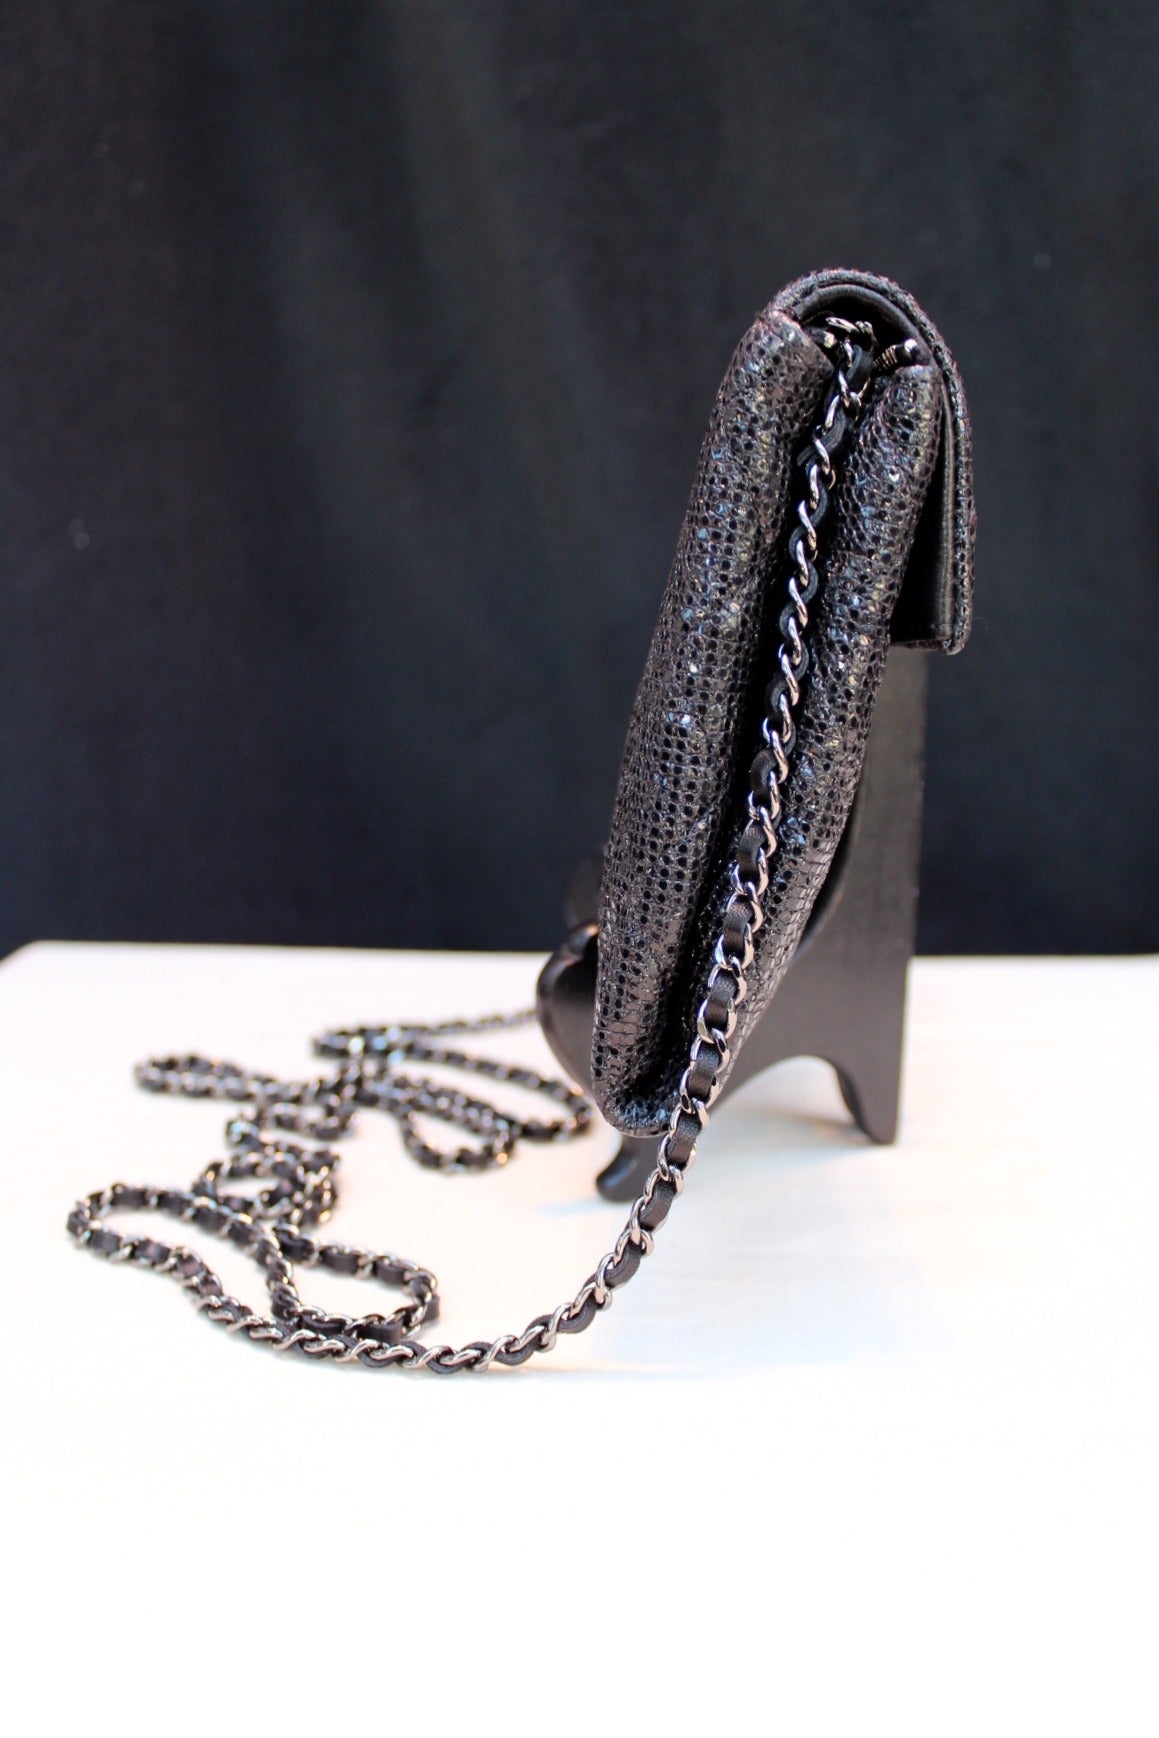 Women's Iridescent Black Evening Bag with Chain by Chanel, December 2014